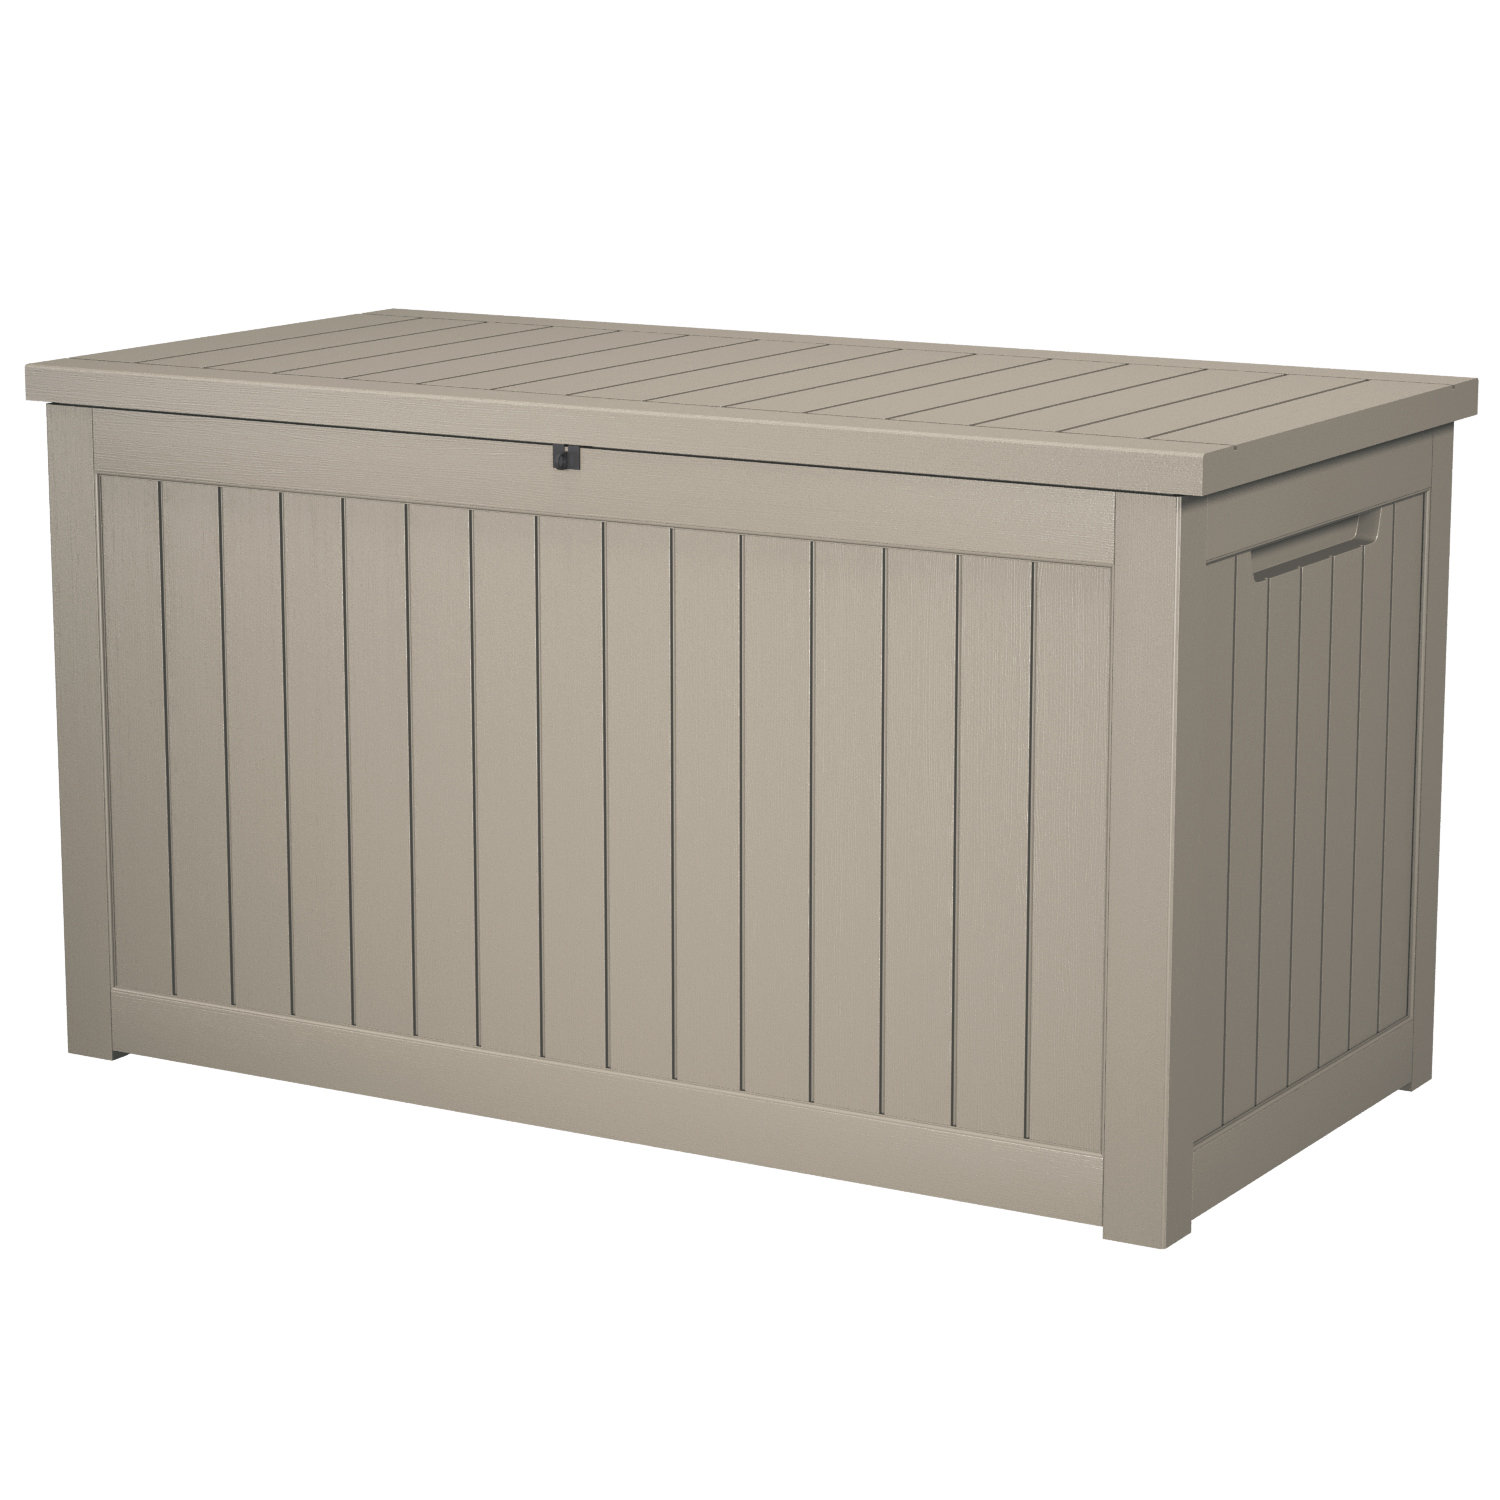 Yitahome  100 Gallon Large Resin Deck Box Indoor Outdoor Storage In Light  Taupe